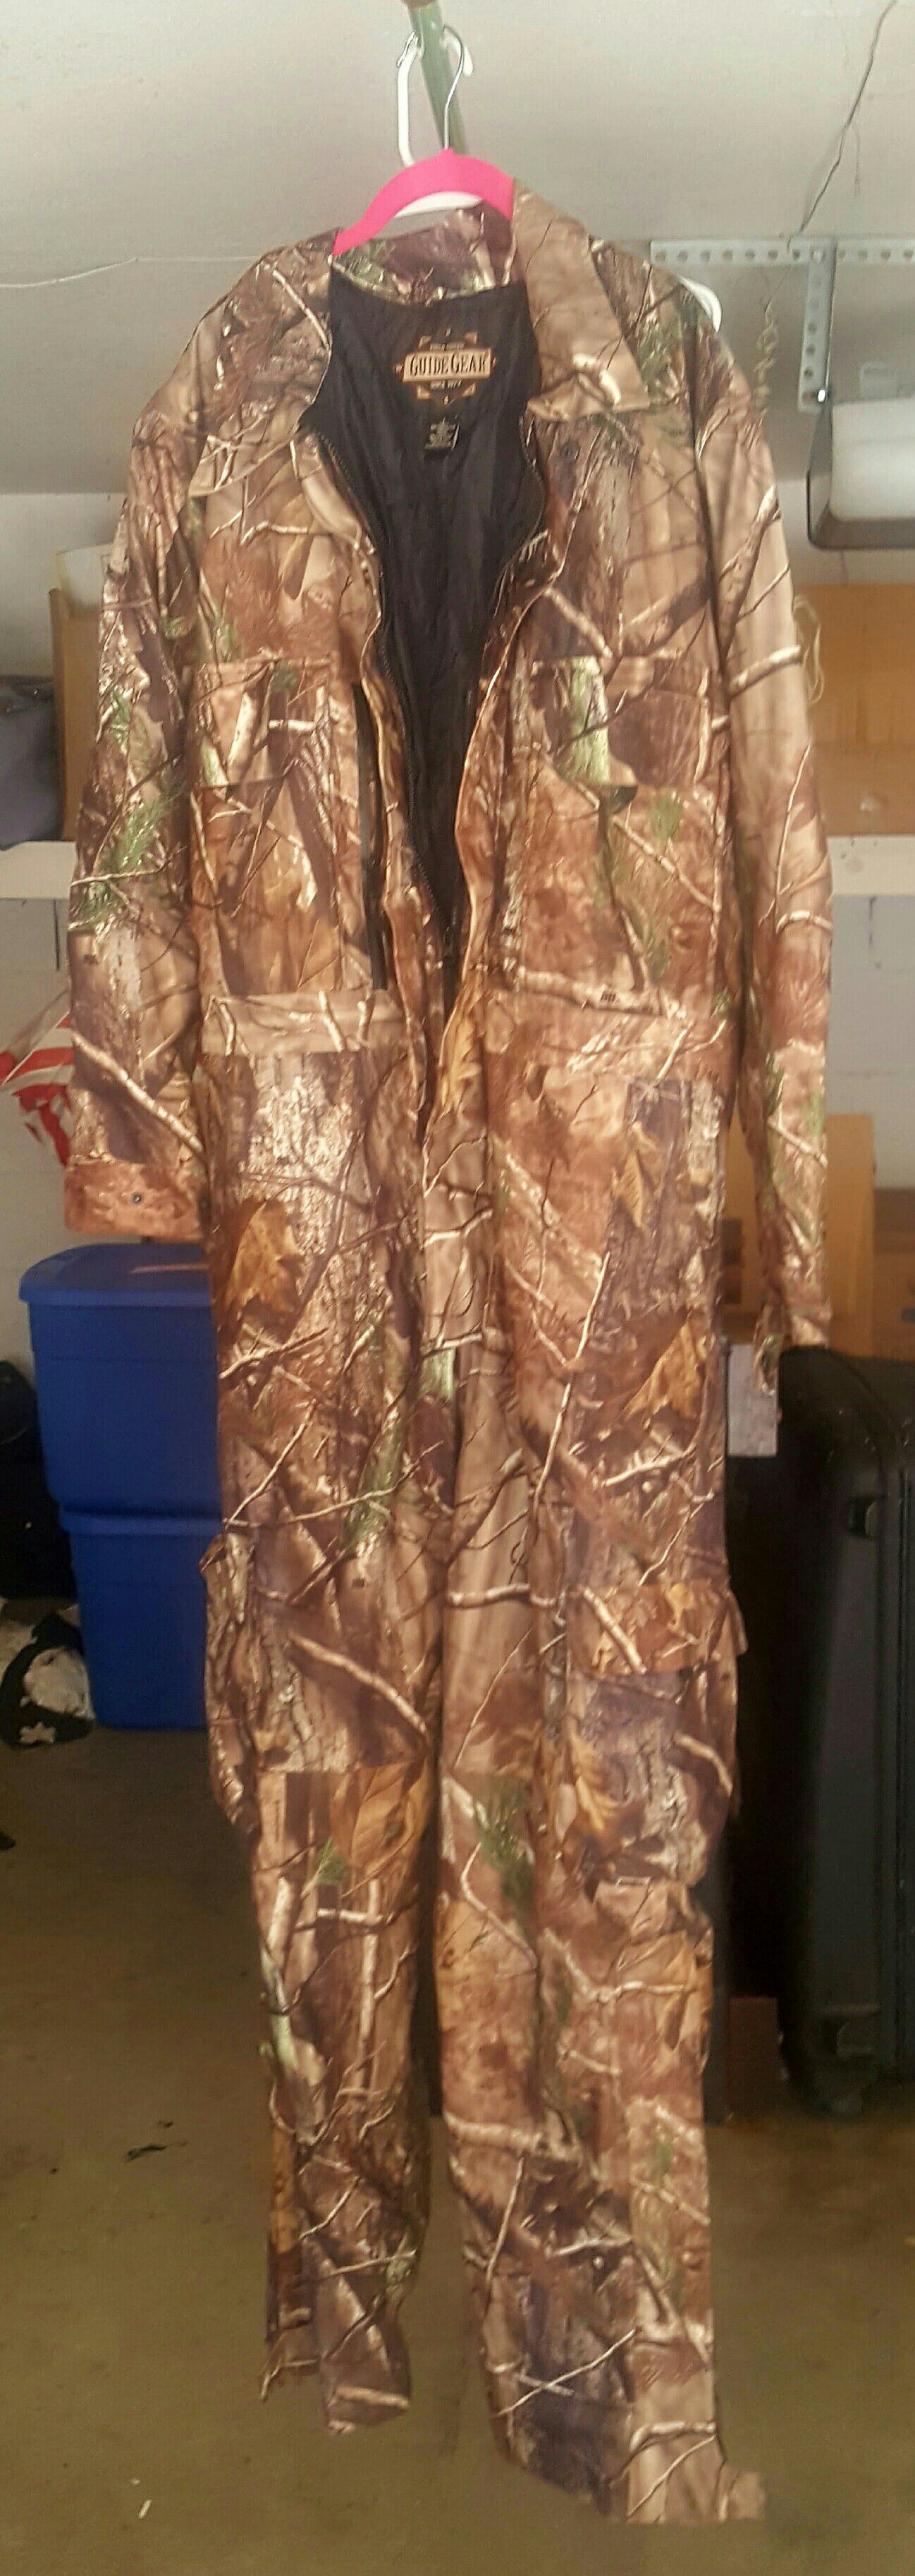 Guide gear hunting coveralls